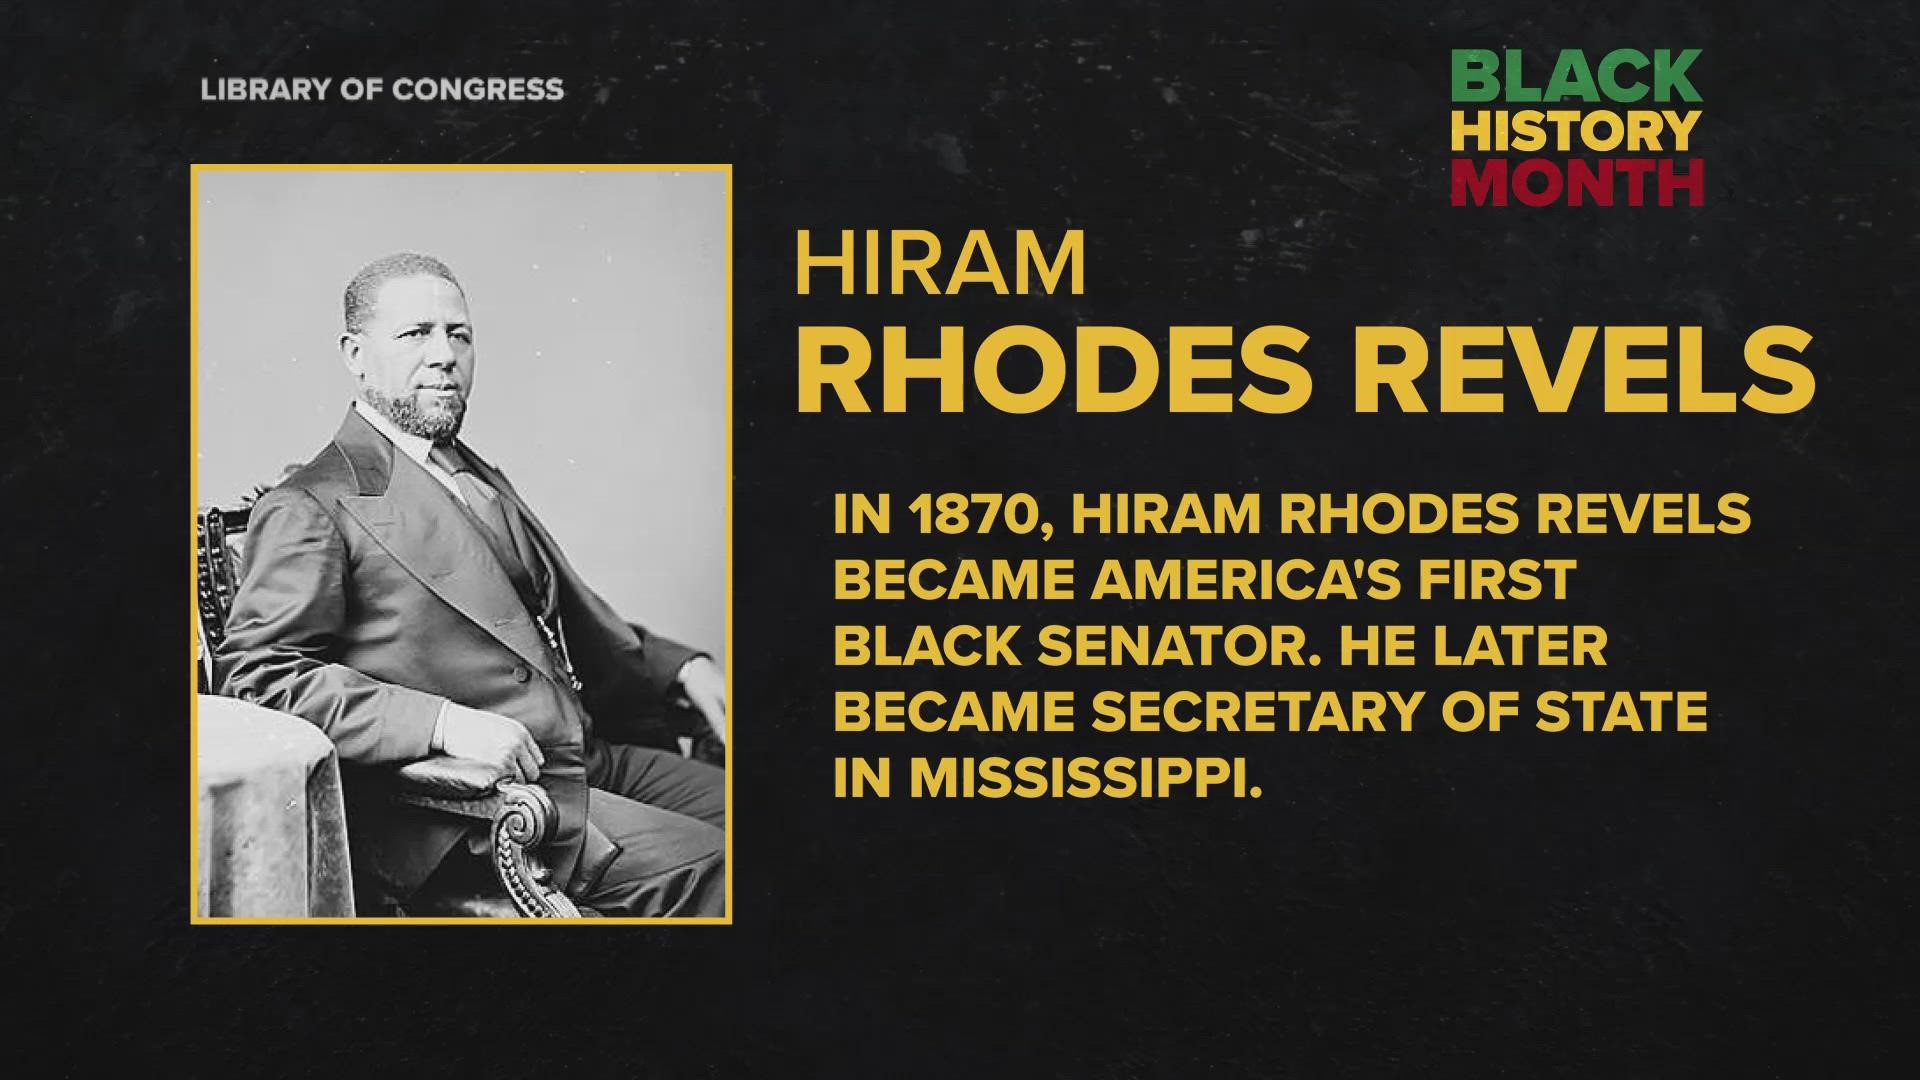 Hiram Rhodes Revels was America's first Black senator. He later became the secretary of state in Mississippi.